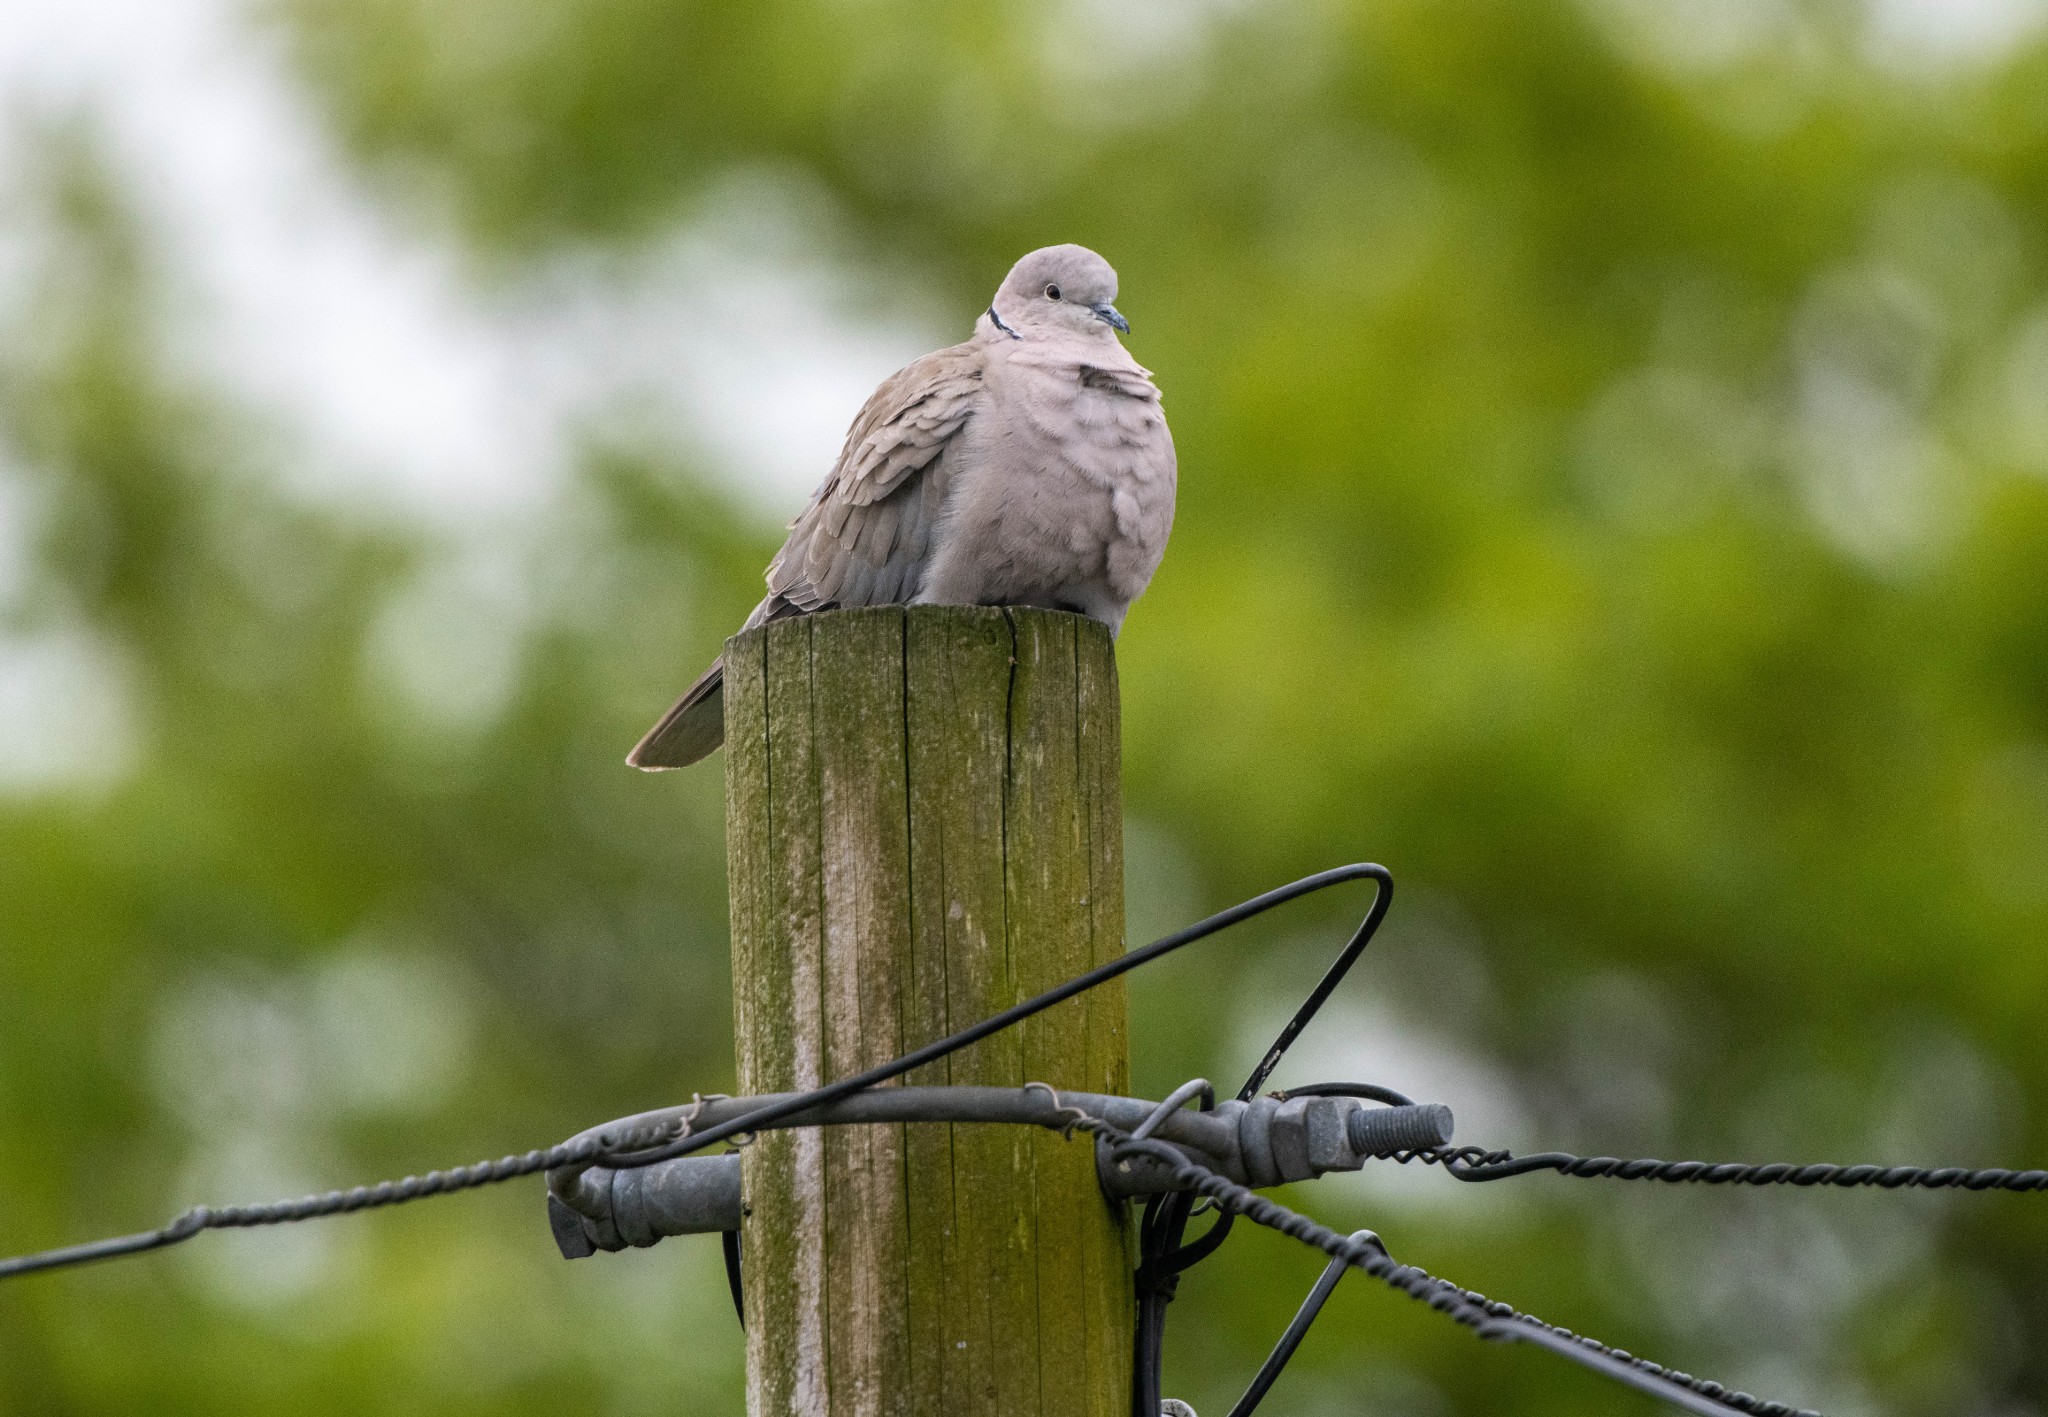 Collared dove - image by Raymond Besant